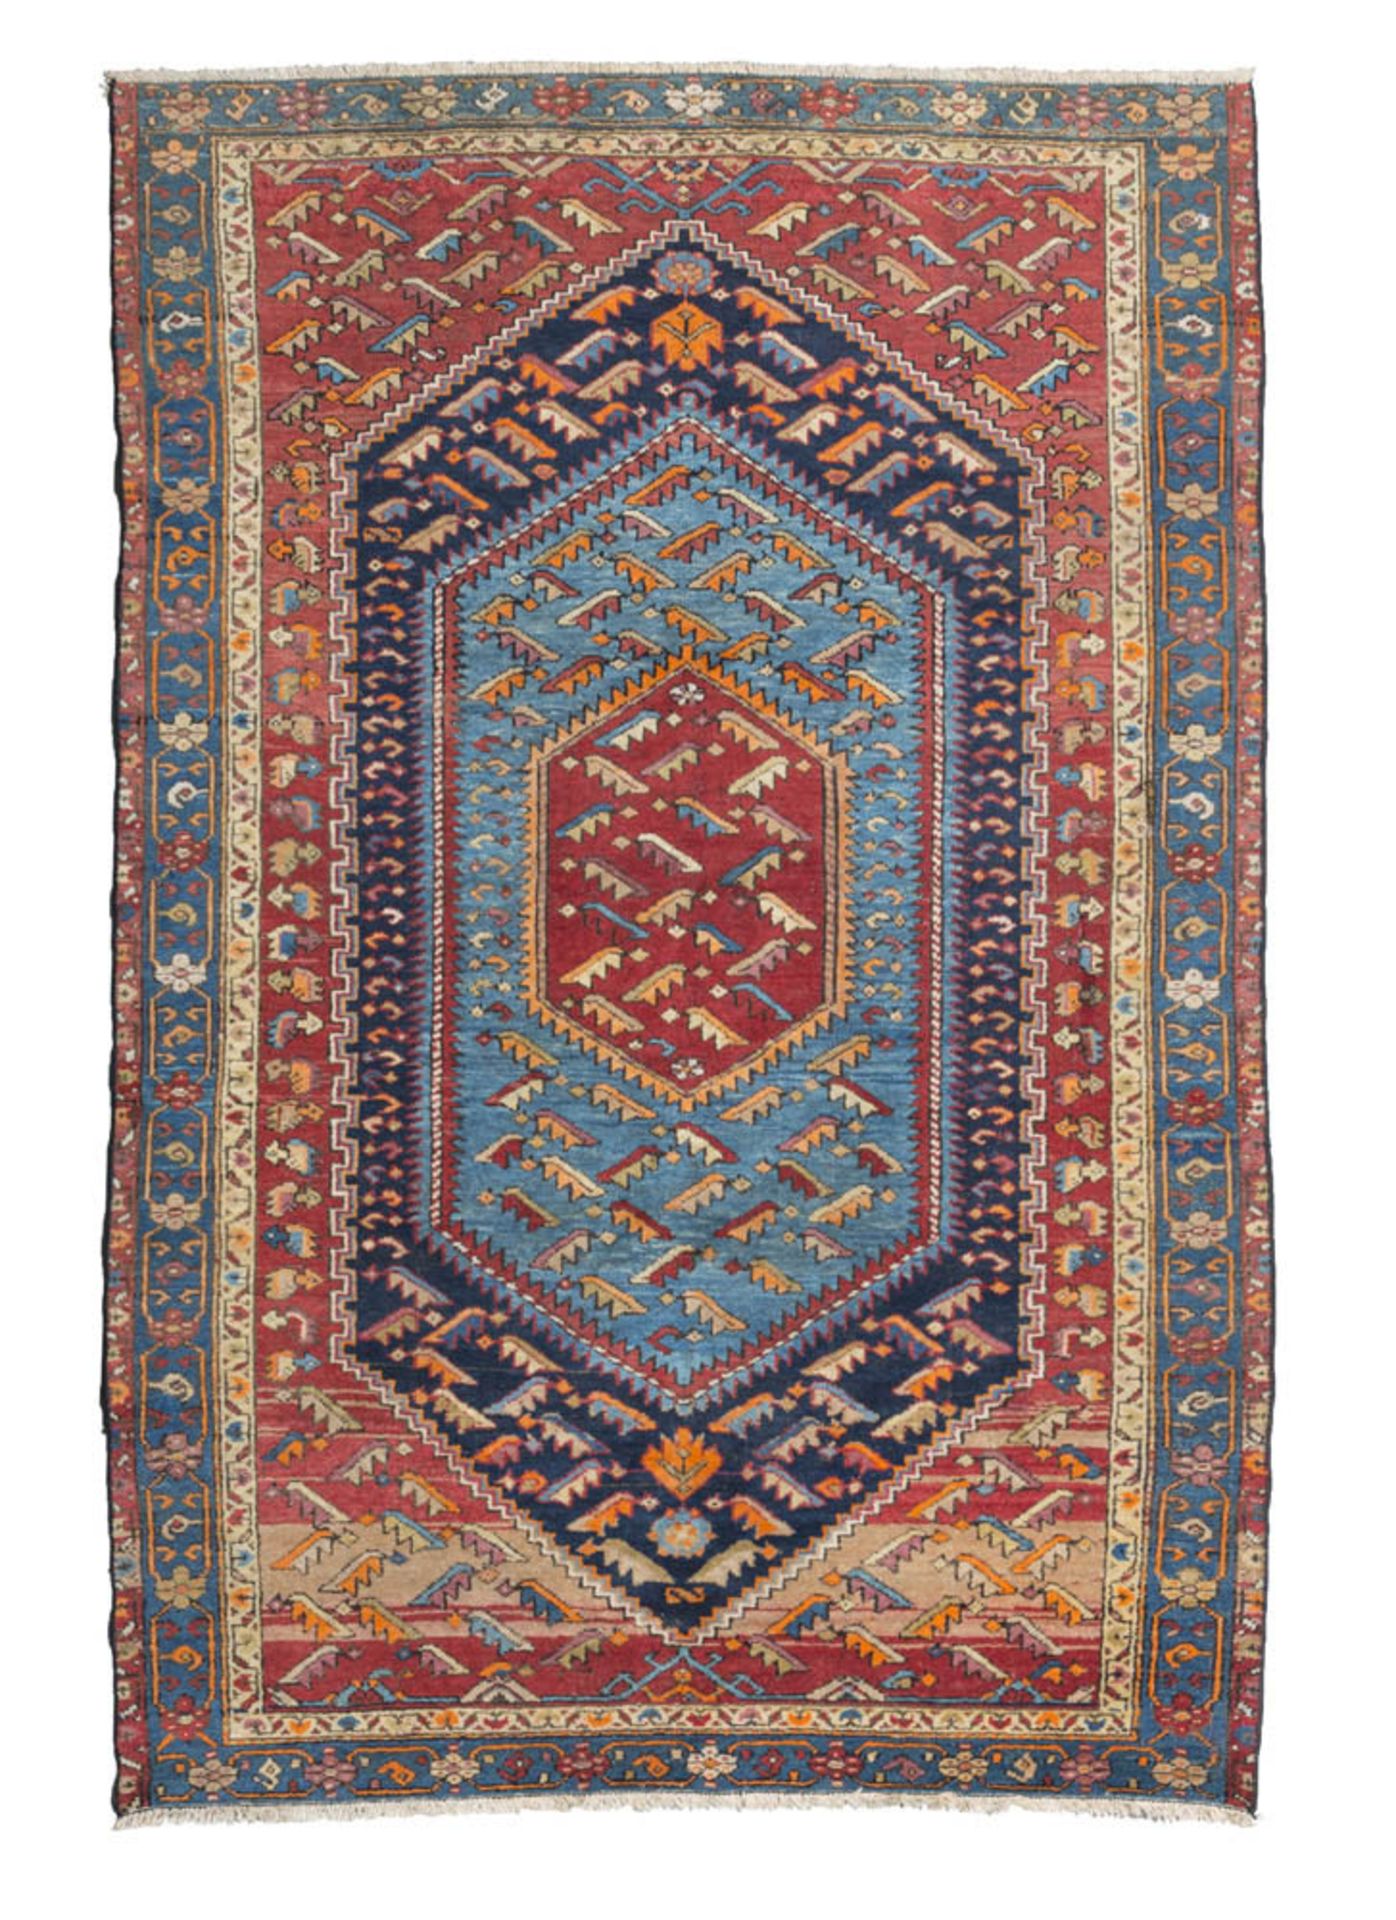 PERSIAN MOSSUL CARPET, EARLY 20TH CENTURY with sketch to motley shed herati, in the central field to